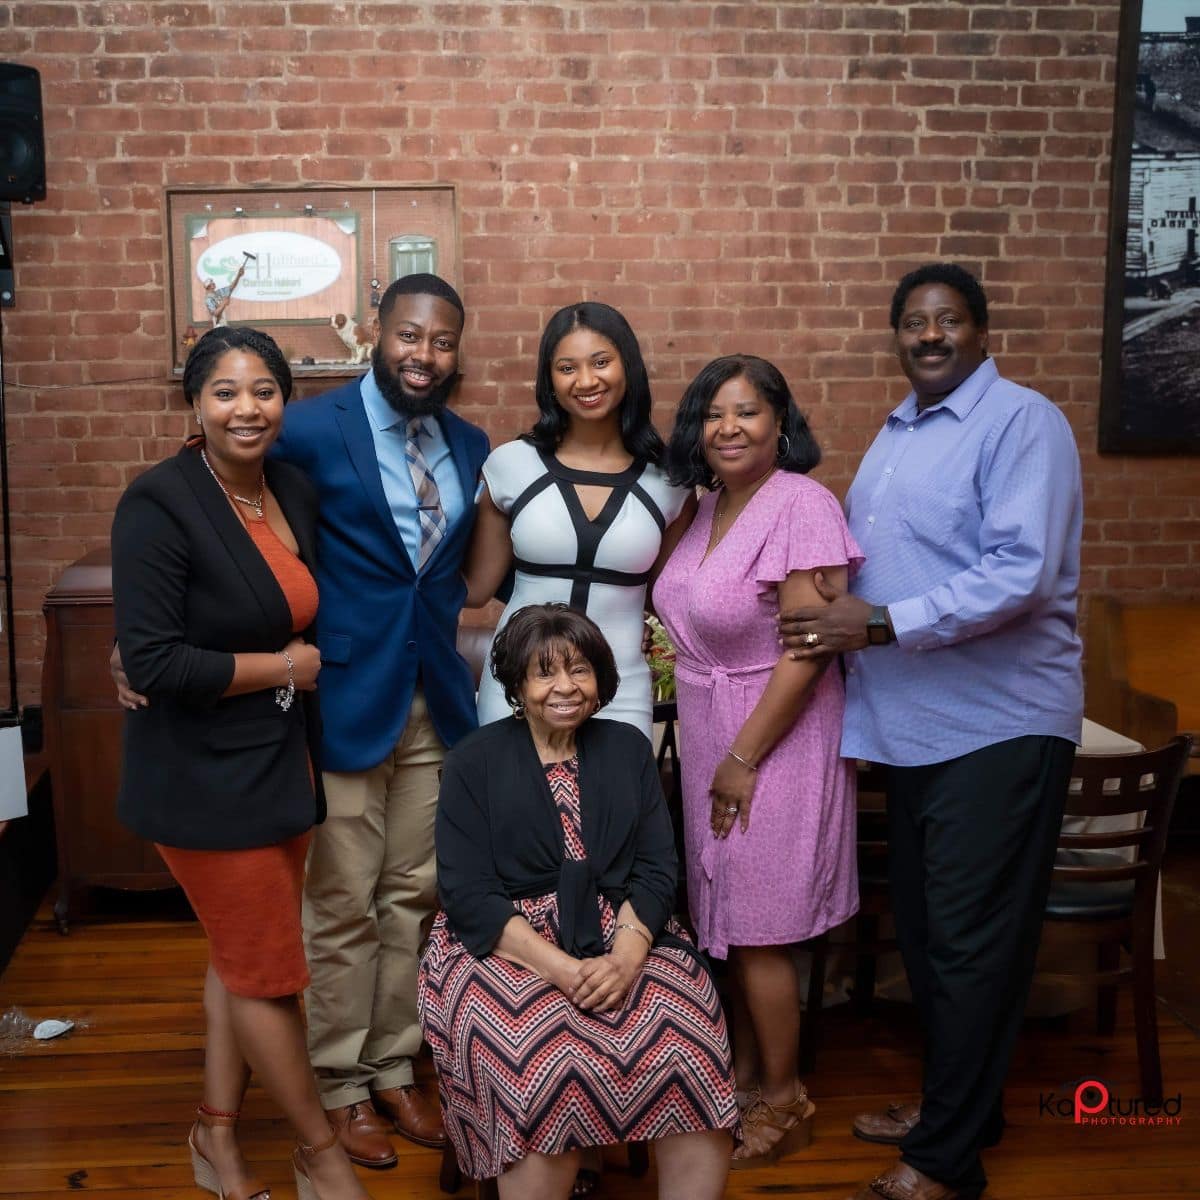 Members of Tonia Brown’s family at a recent get together. From left, Toneen, Tonia’s fiancé Cash Davis, Tonia, mother Deneen, father Tony and Grandma Diggs (seated).